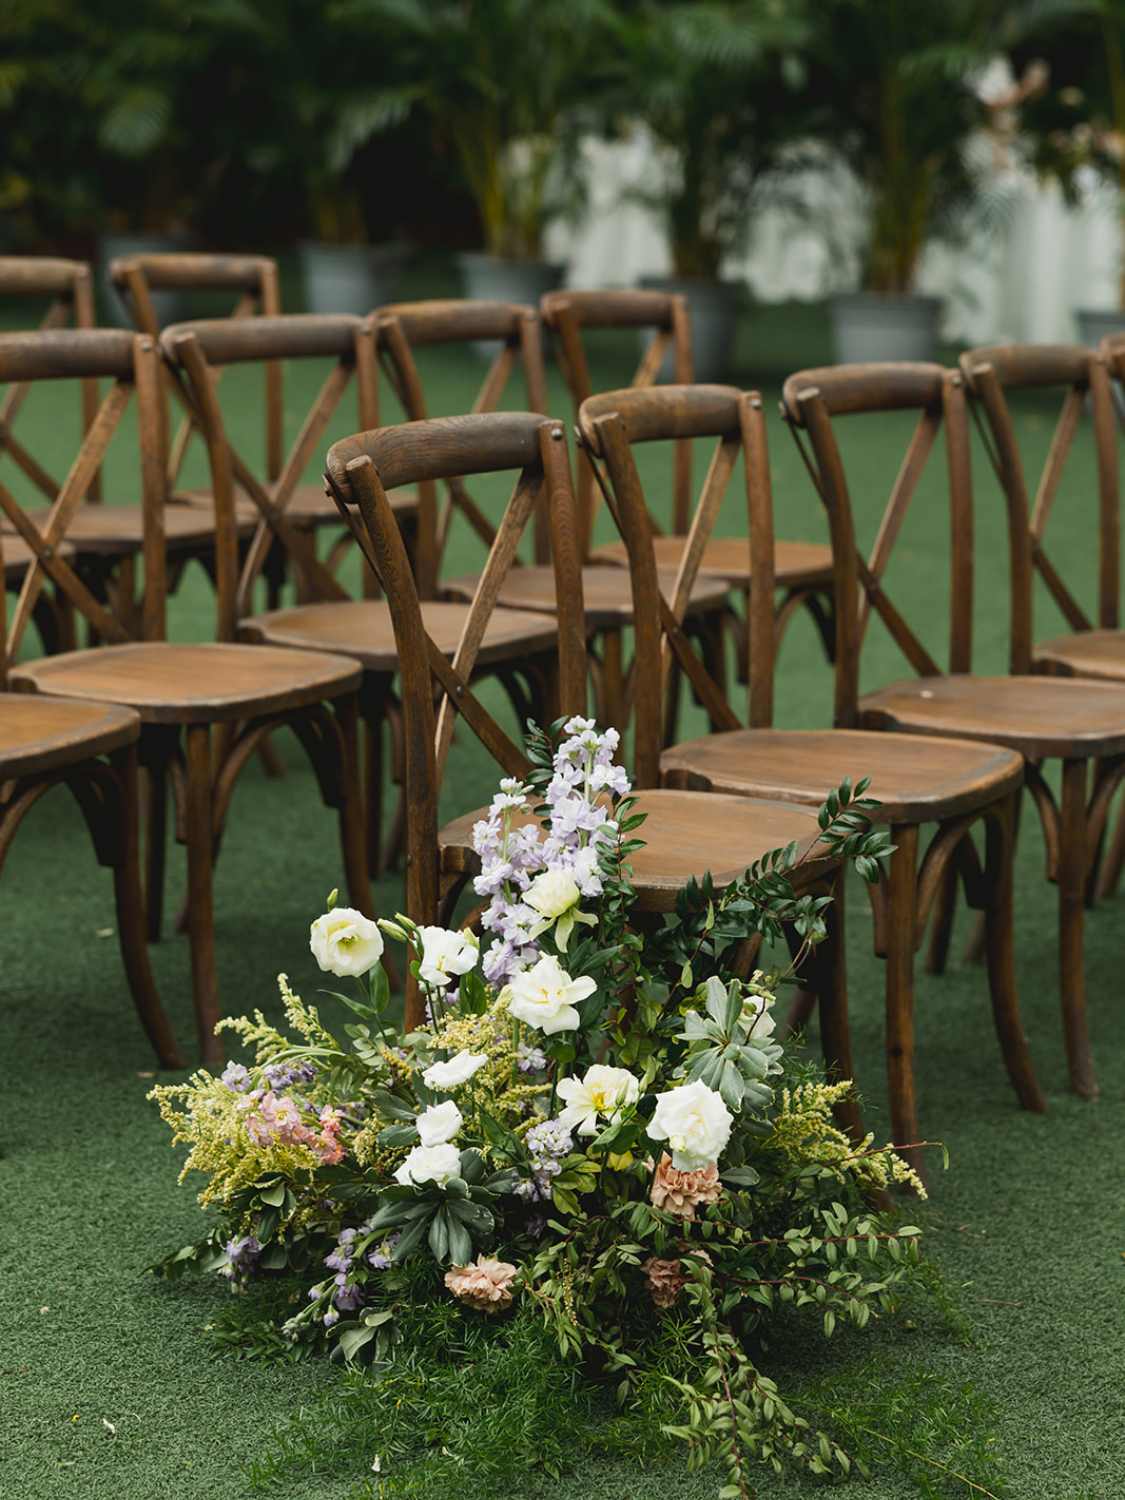 wooden chairs arranged for a wedding ceremony with floral decorations in a garden setting.